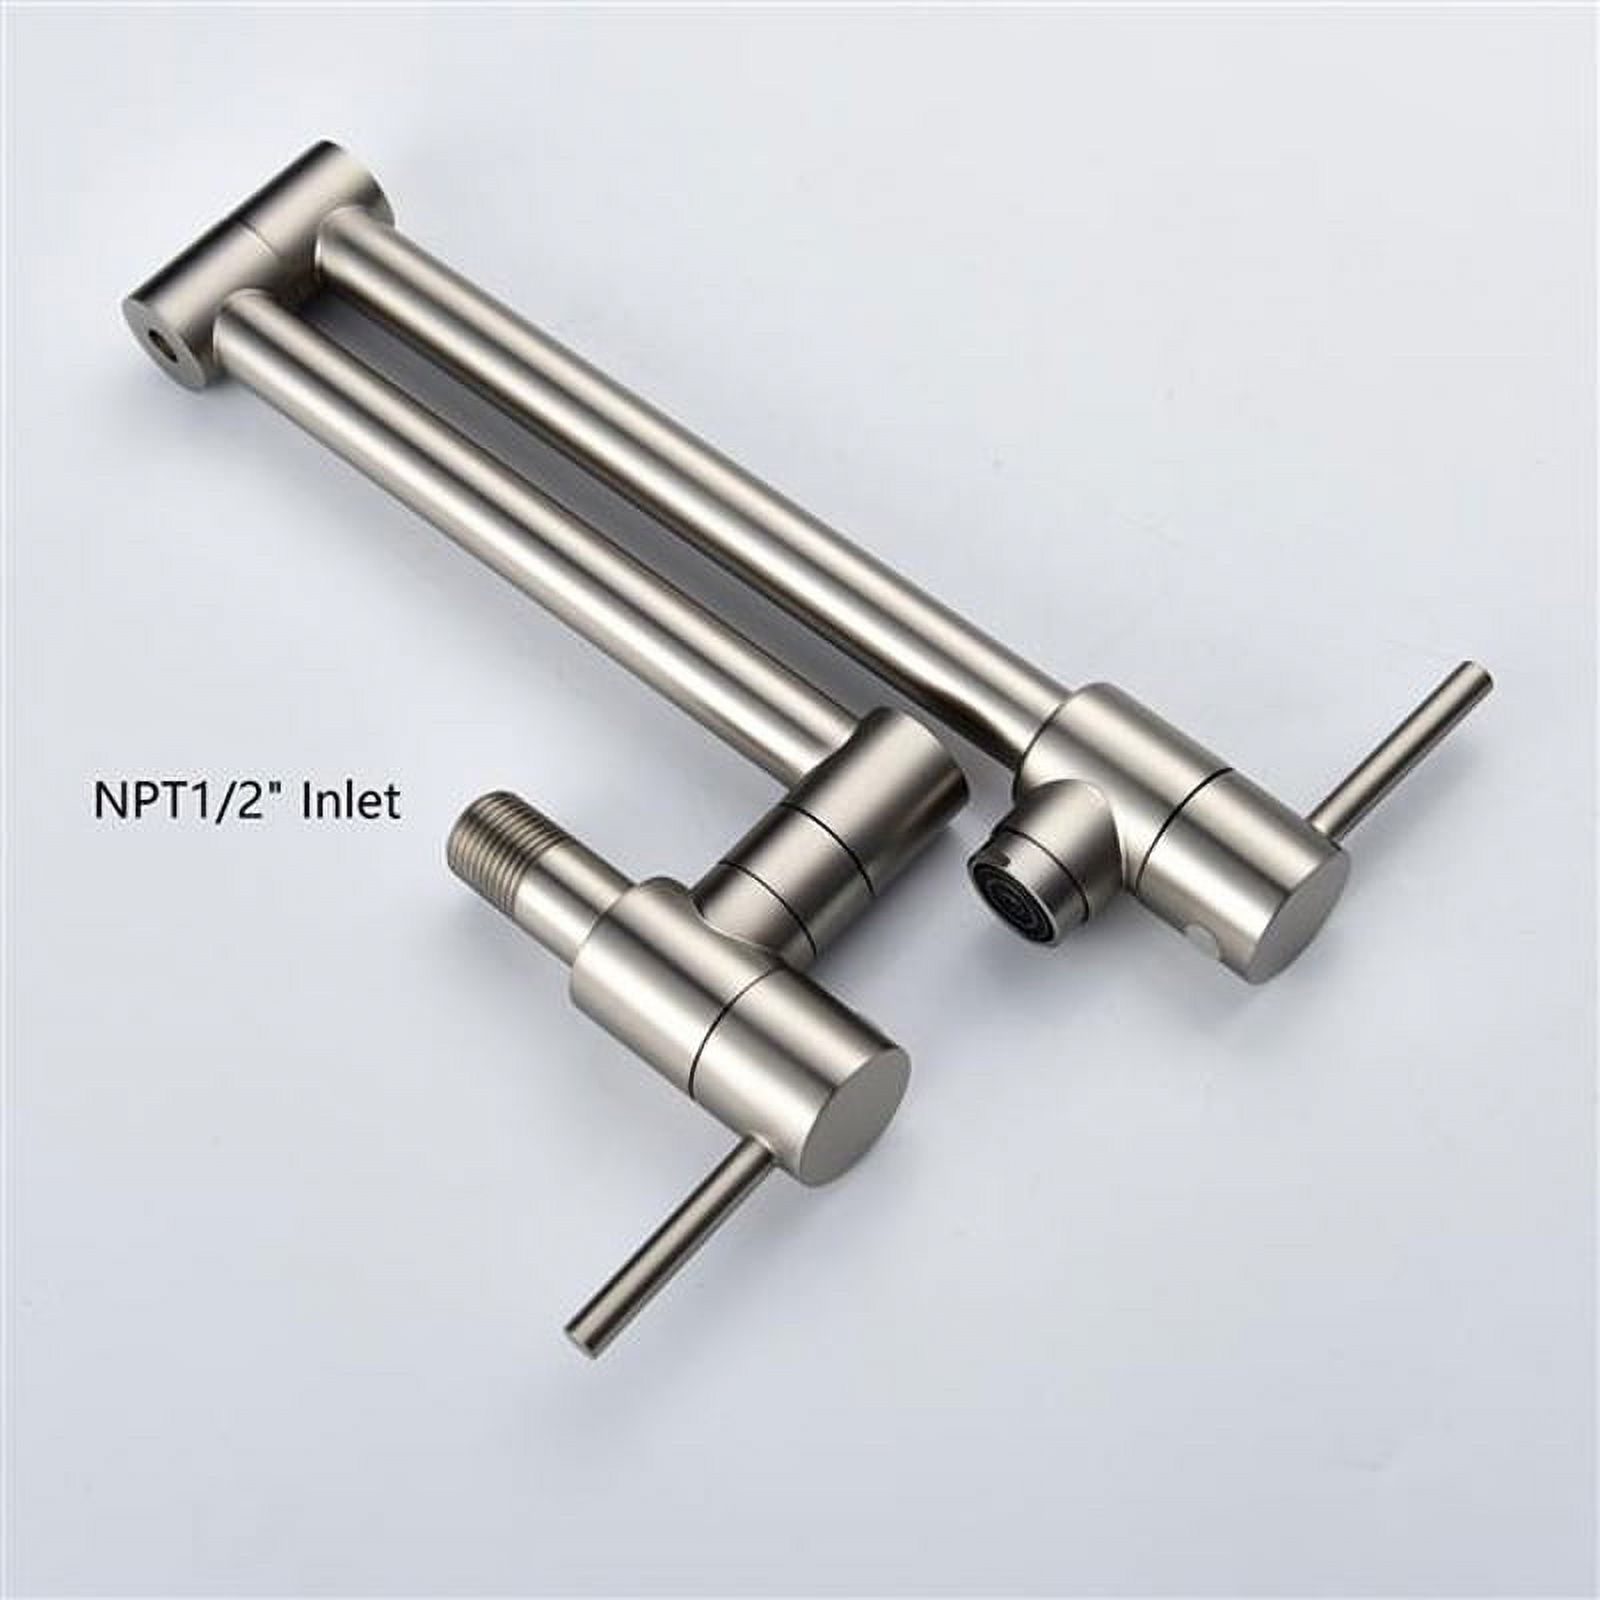 Wall Mount Kitchen Faucet 1/2” Brass Folding Pot Filler Tap Single Hole Kitchen Sink Tap for Cold Water, Silver - image 2 of 7